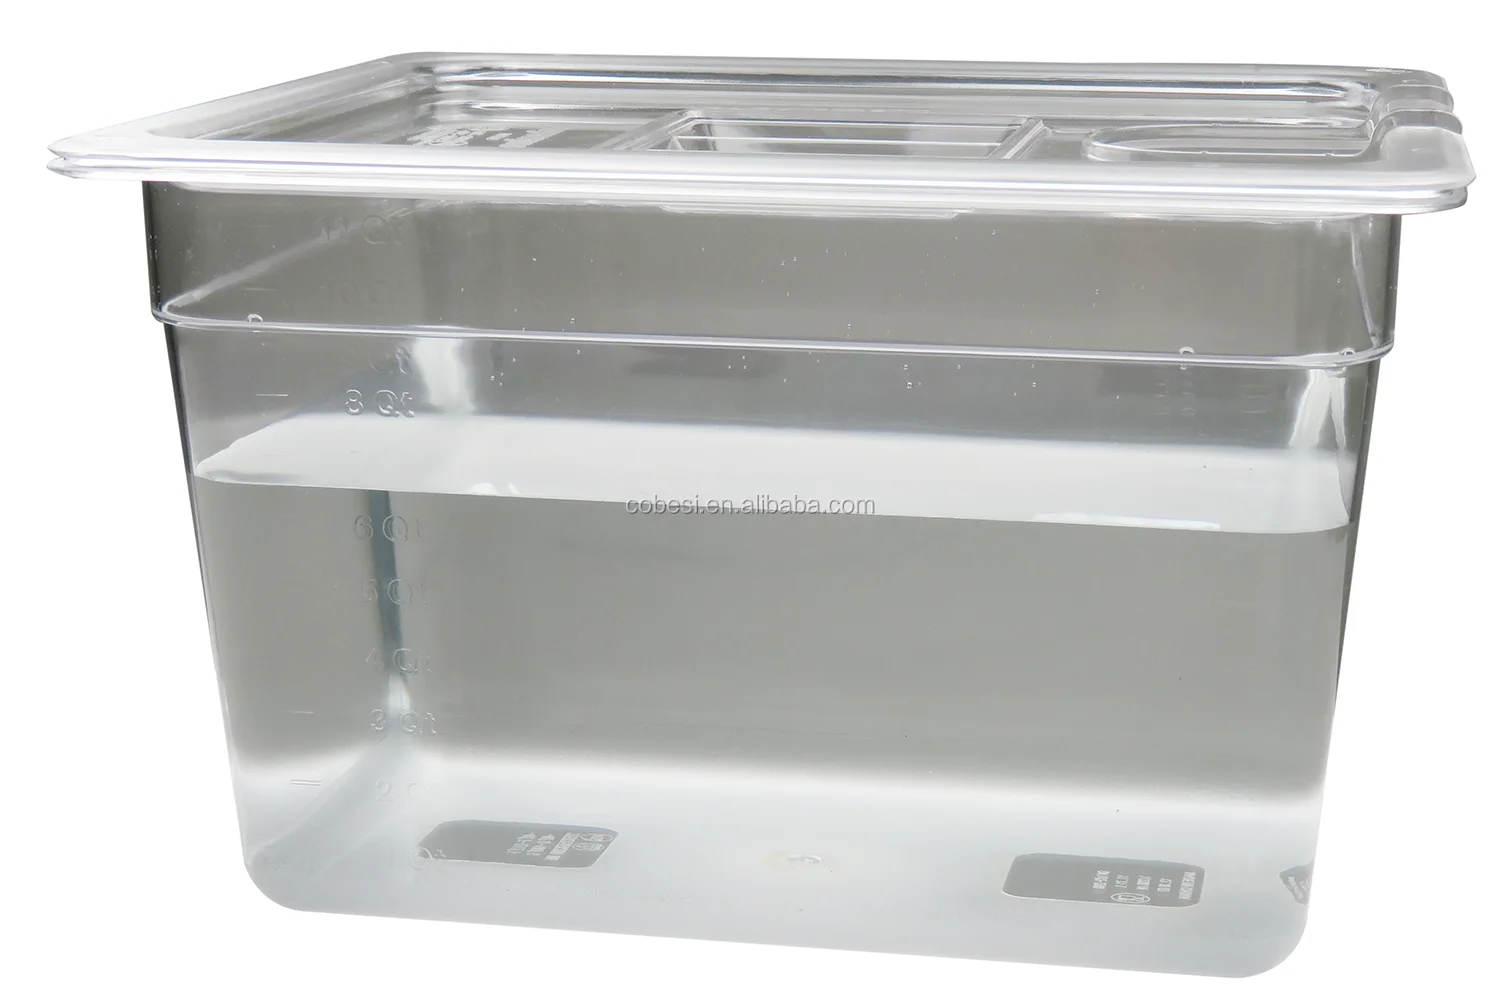 flat plastic storage containers